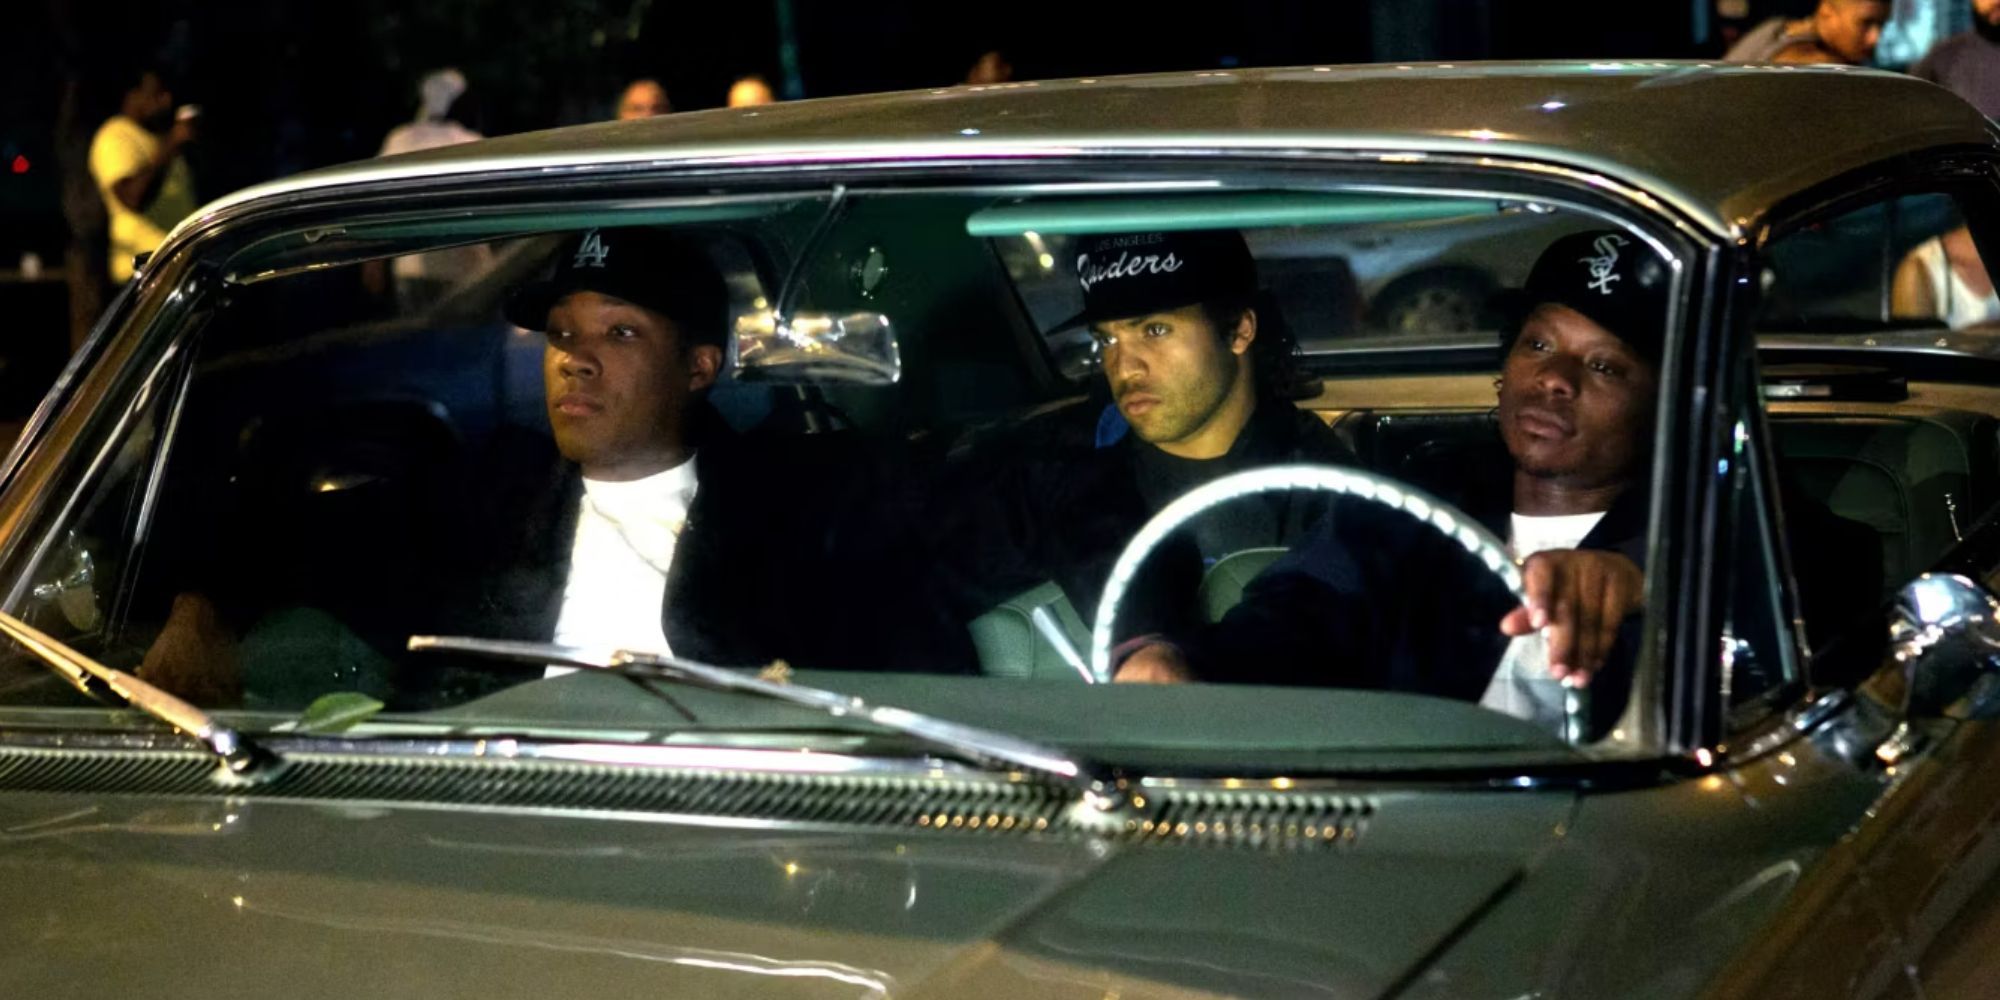 NWA members sitting in a car in Straight Outta Compton